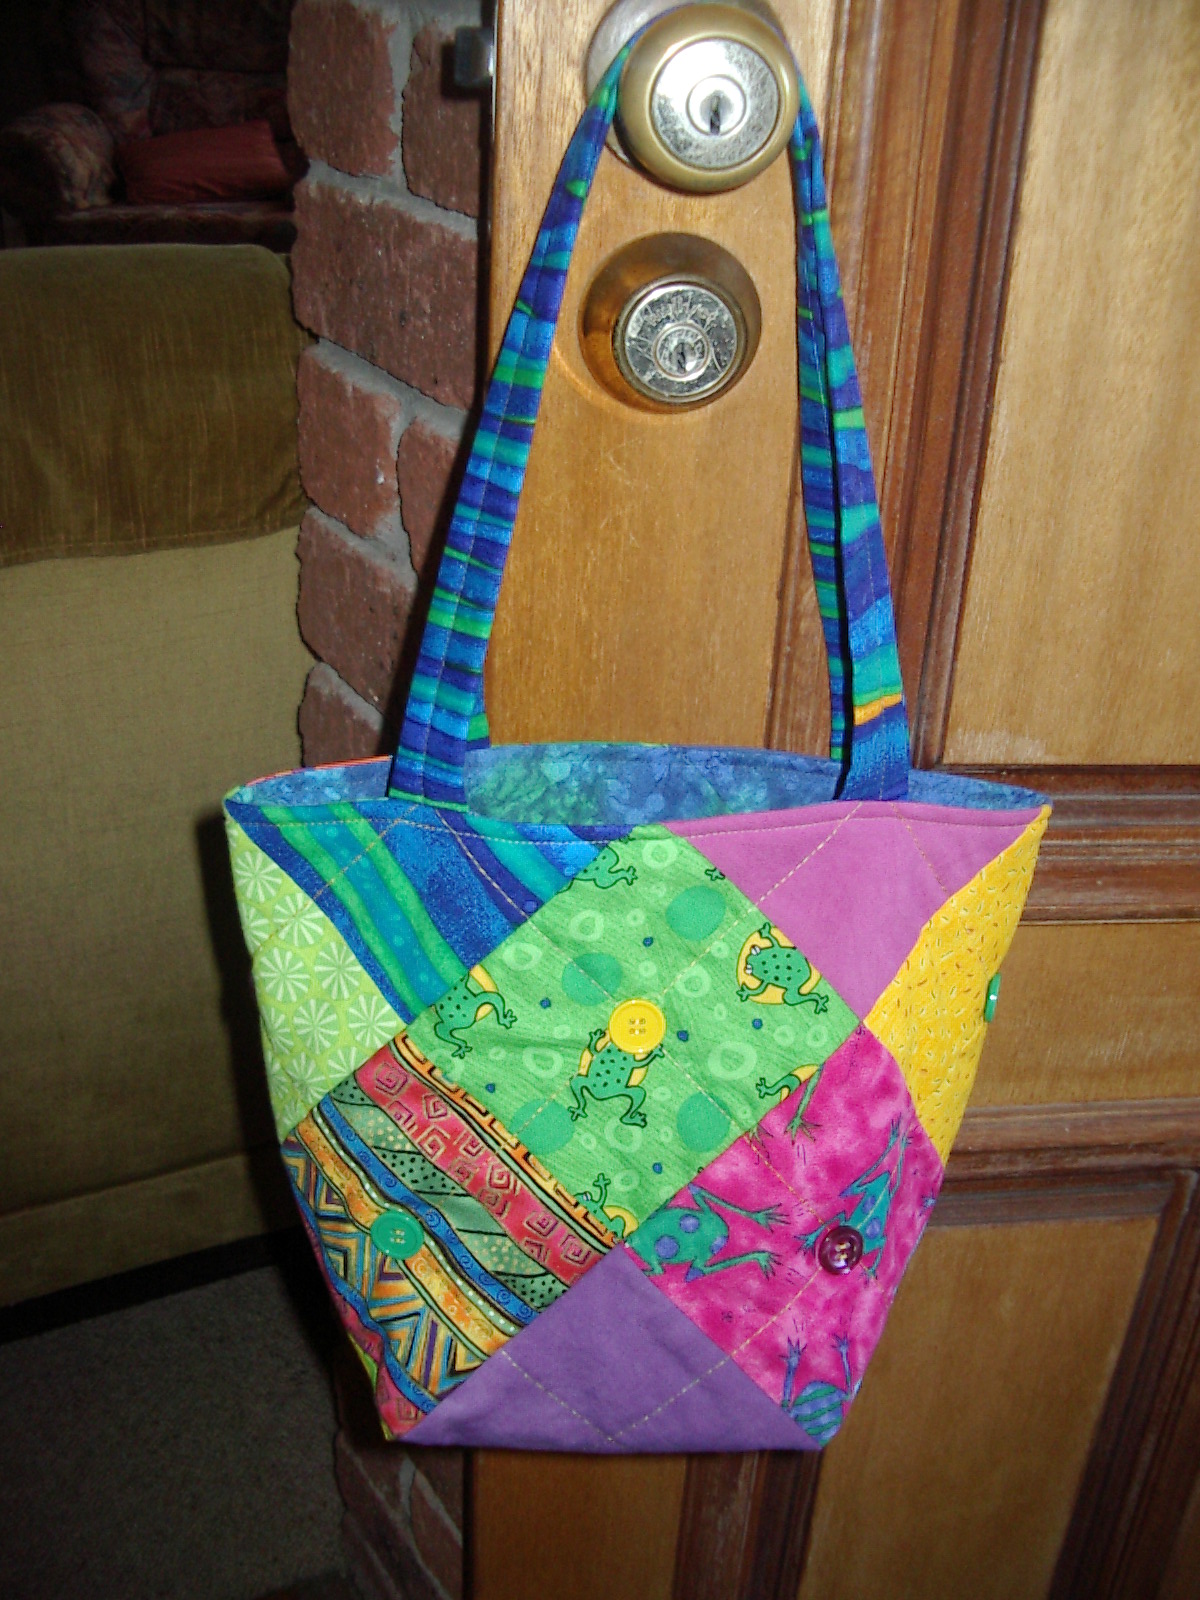 Some of the BAGS I have made